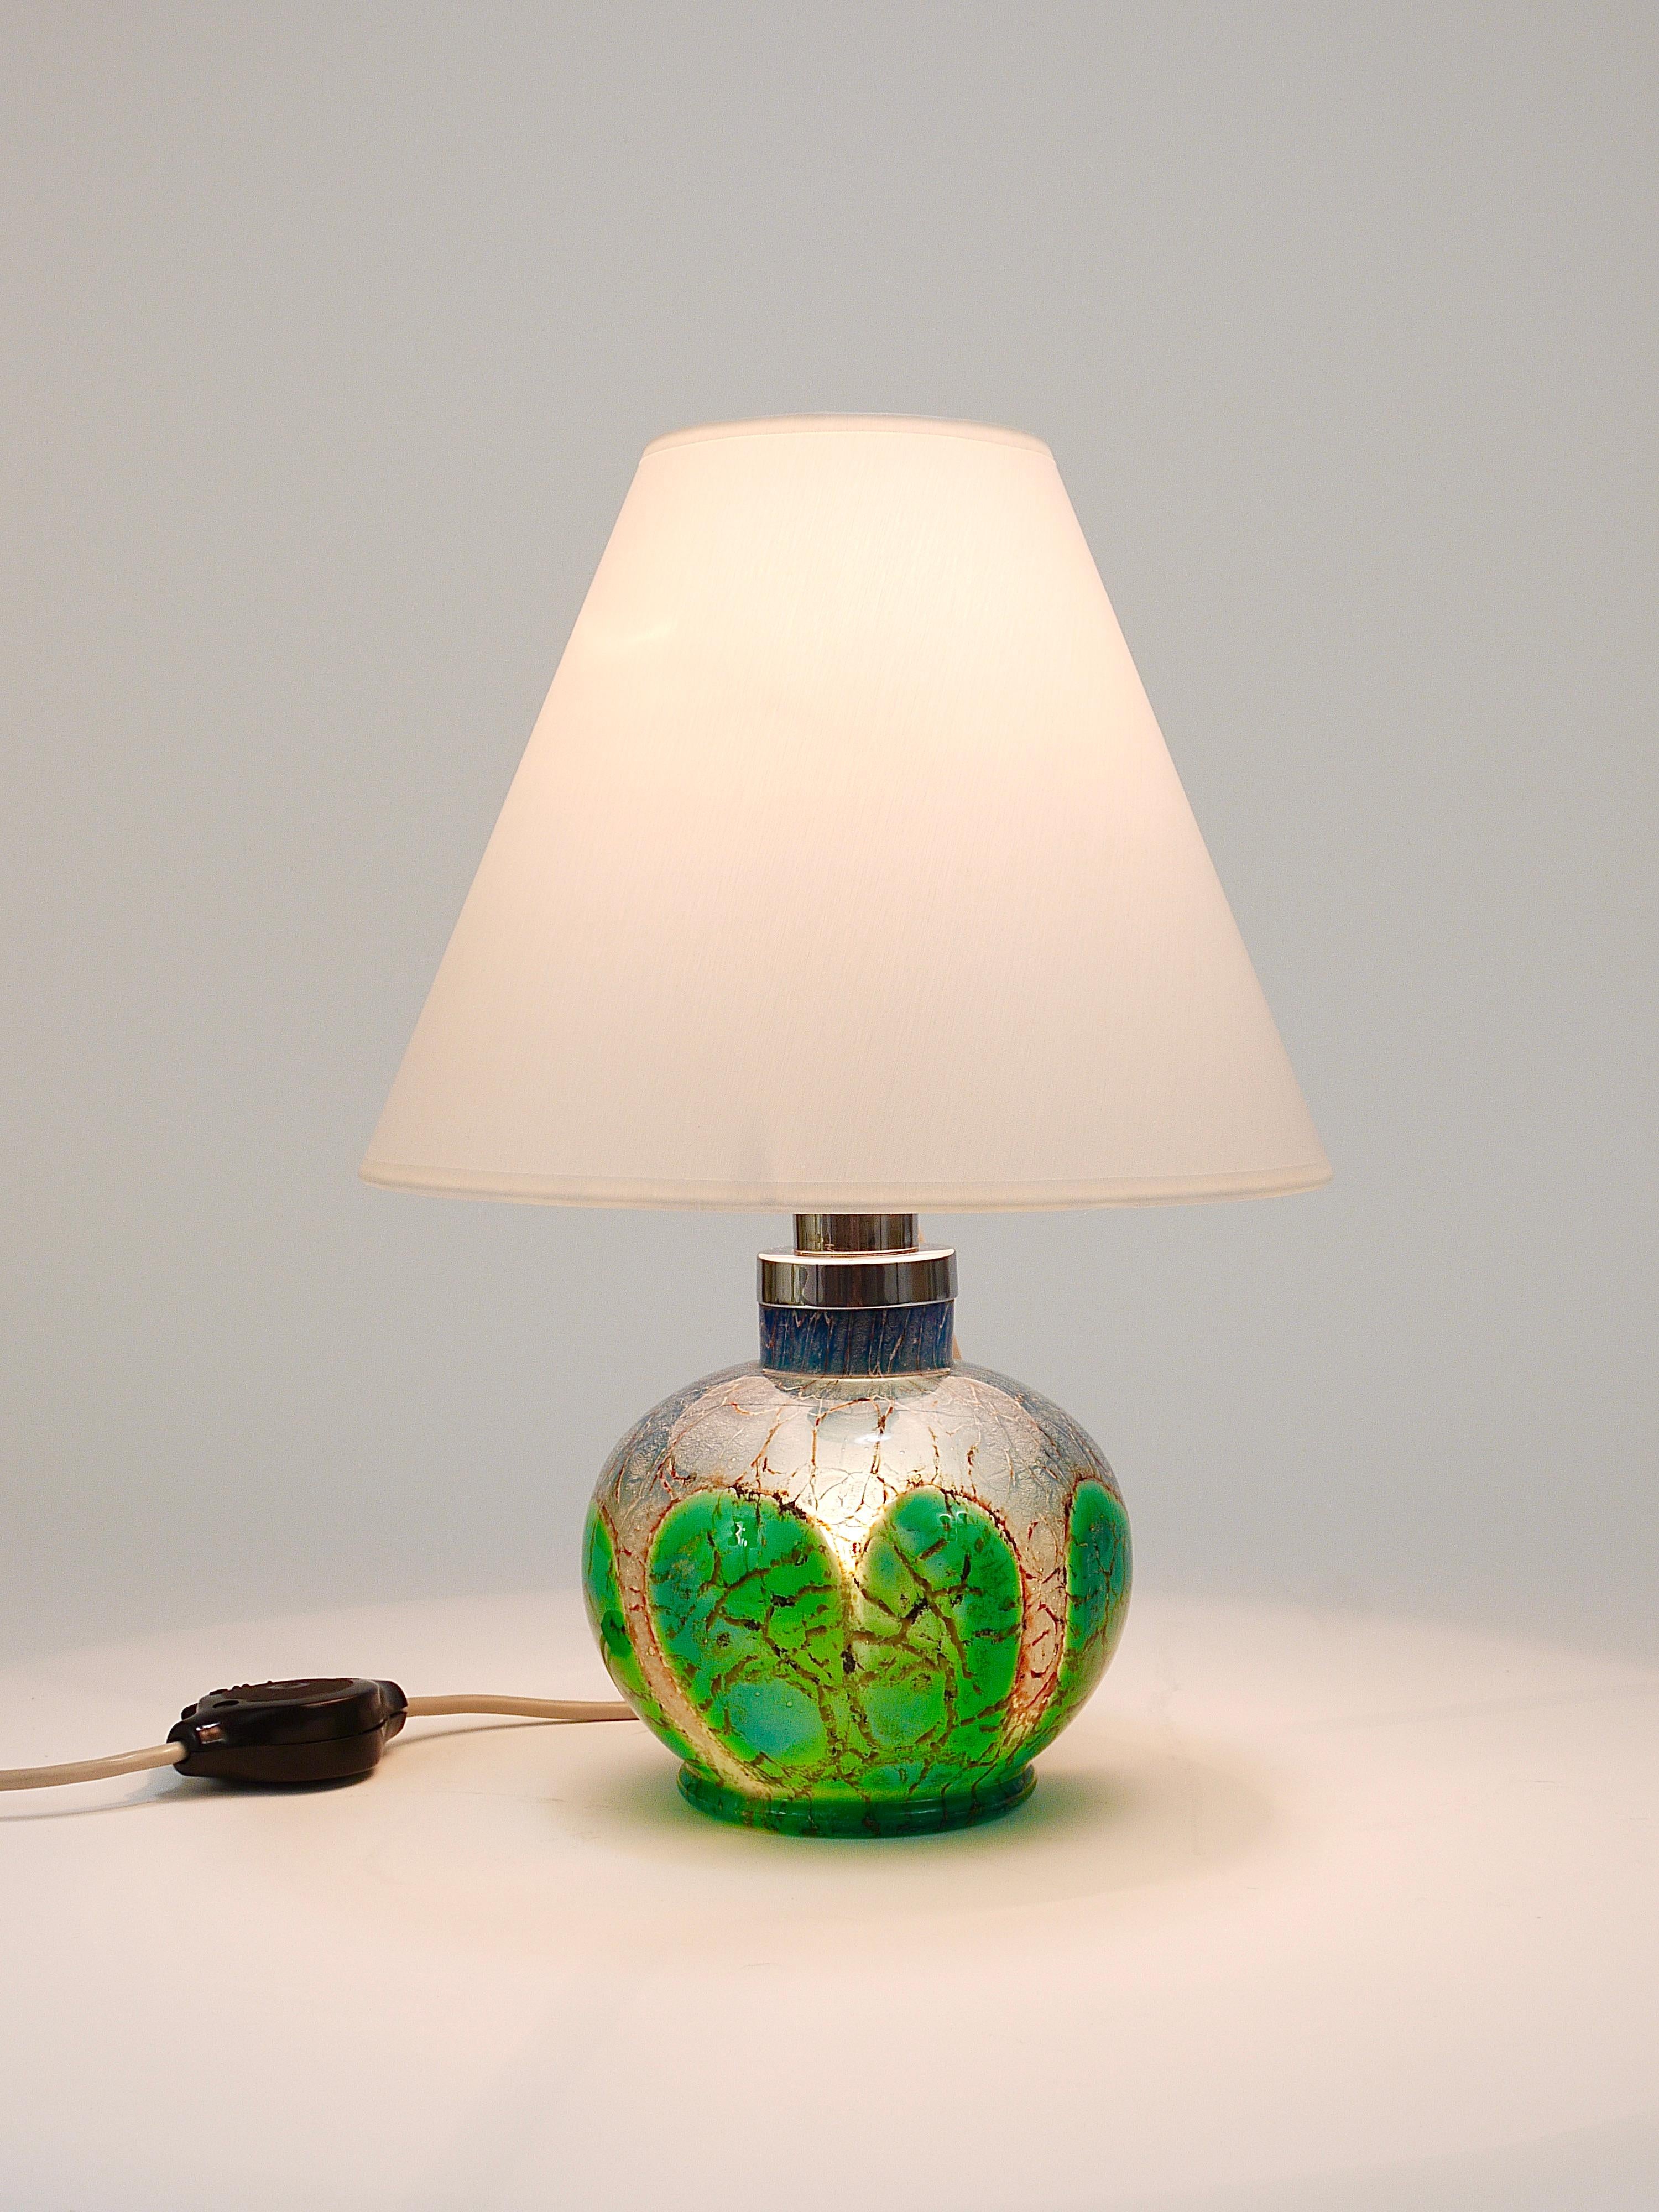 A beautiful classic Art Deco table or side lamp from the 1930s by Karl Wiedmann, executed by WMF Germany. The lamp has a solid green, blue and silver Ikora art glass base, which can be illuminated. This looks fantastic. The light has still its